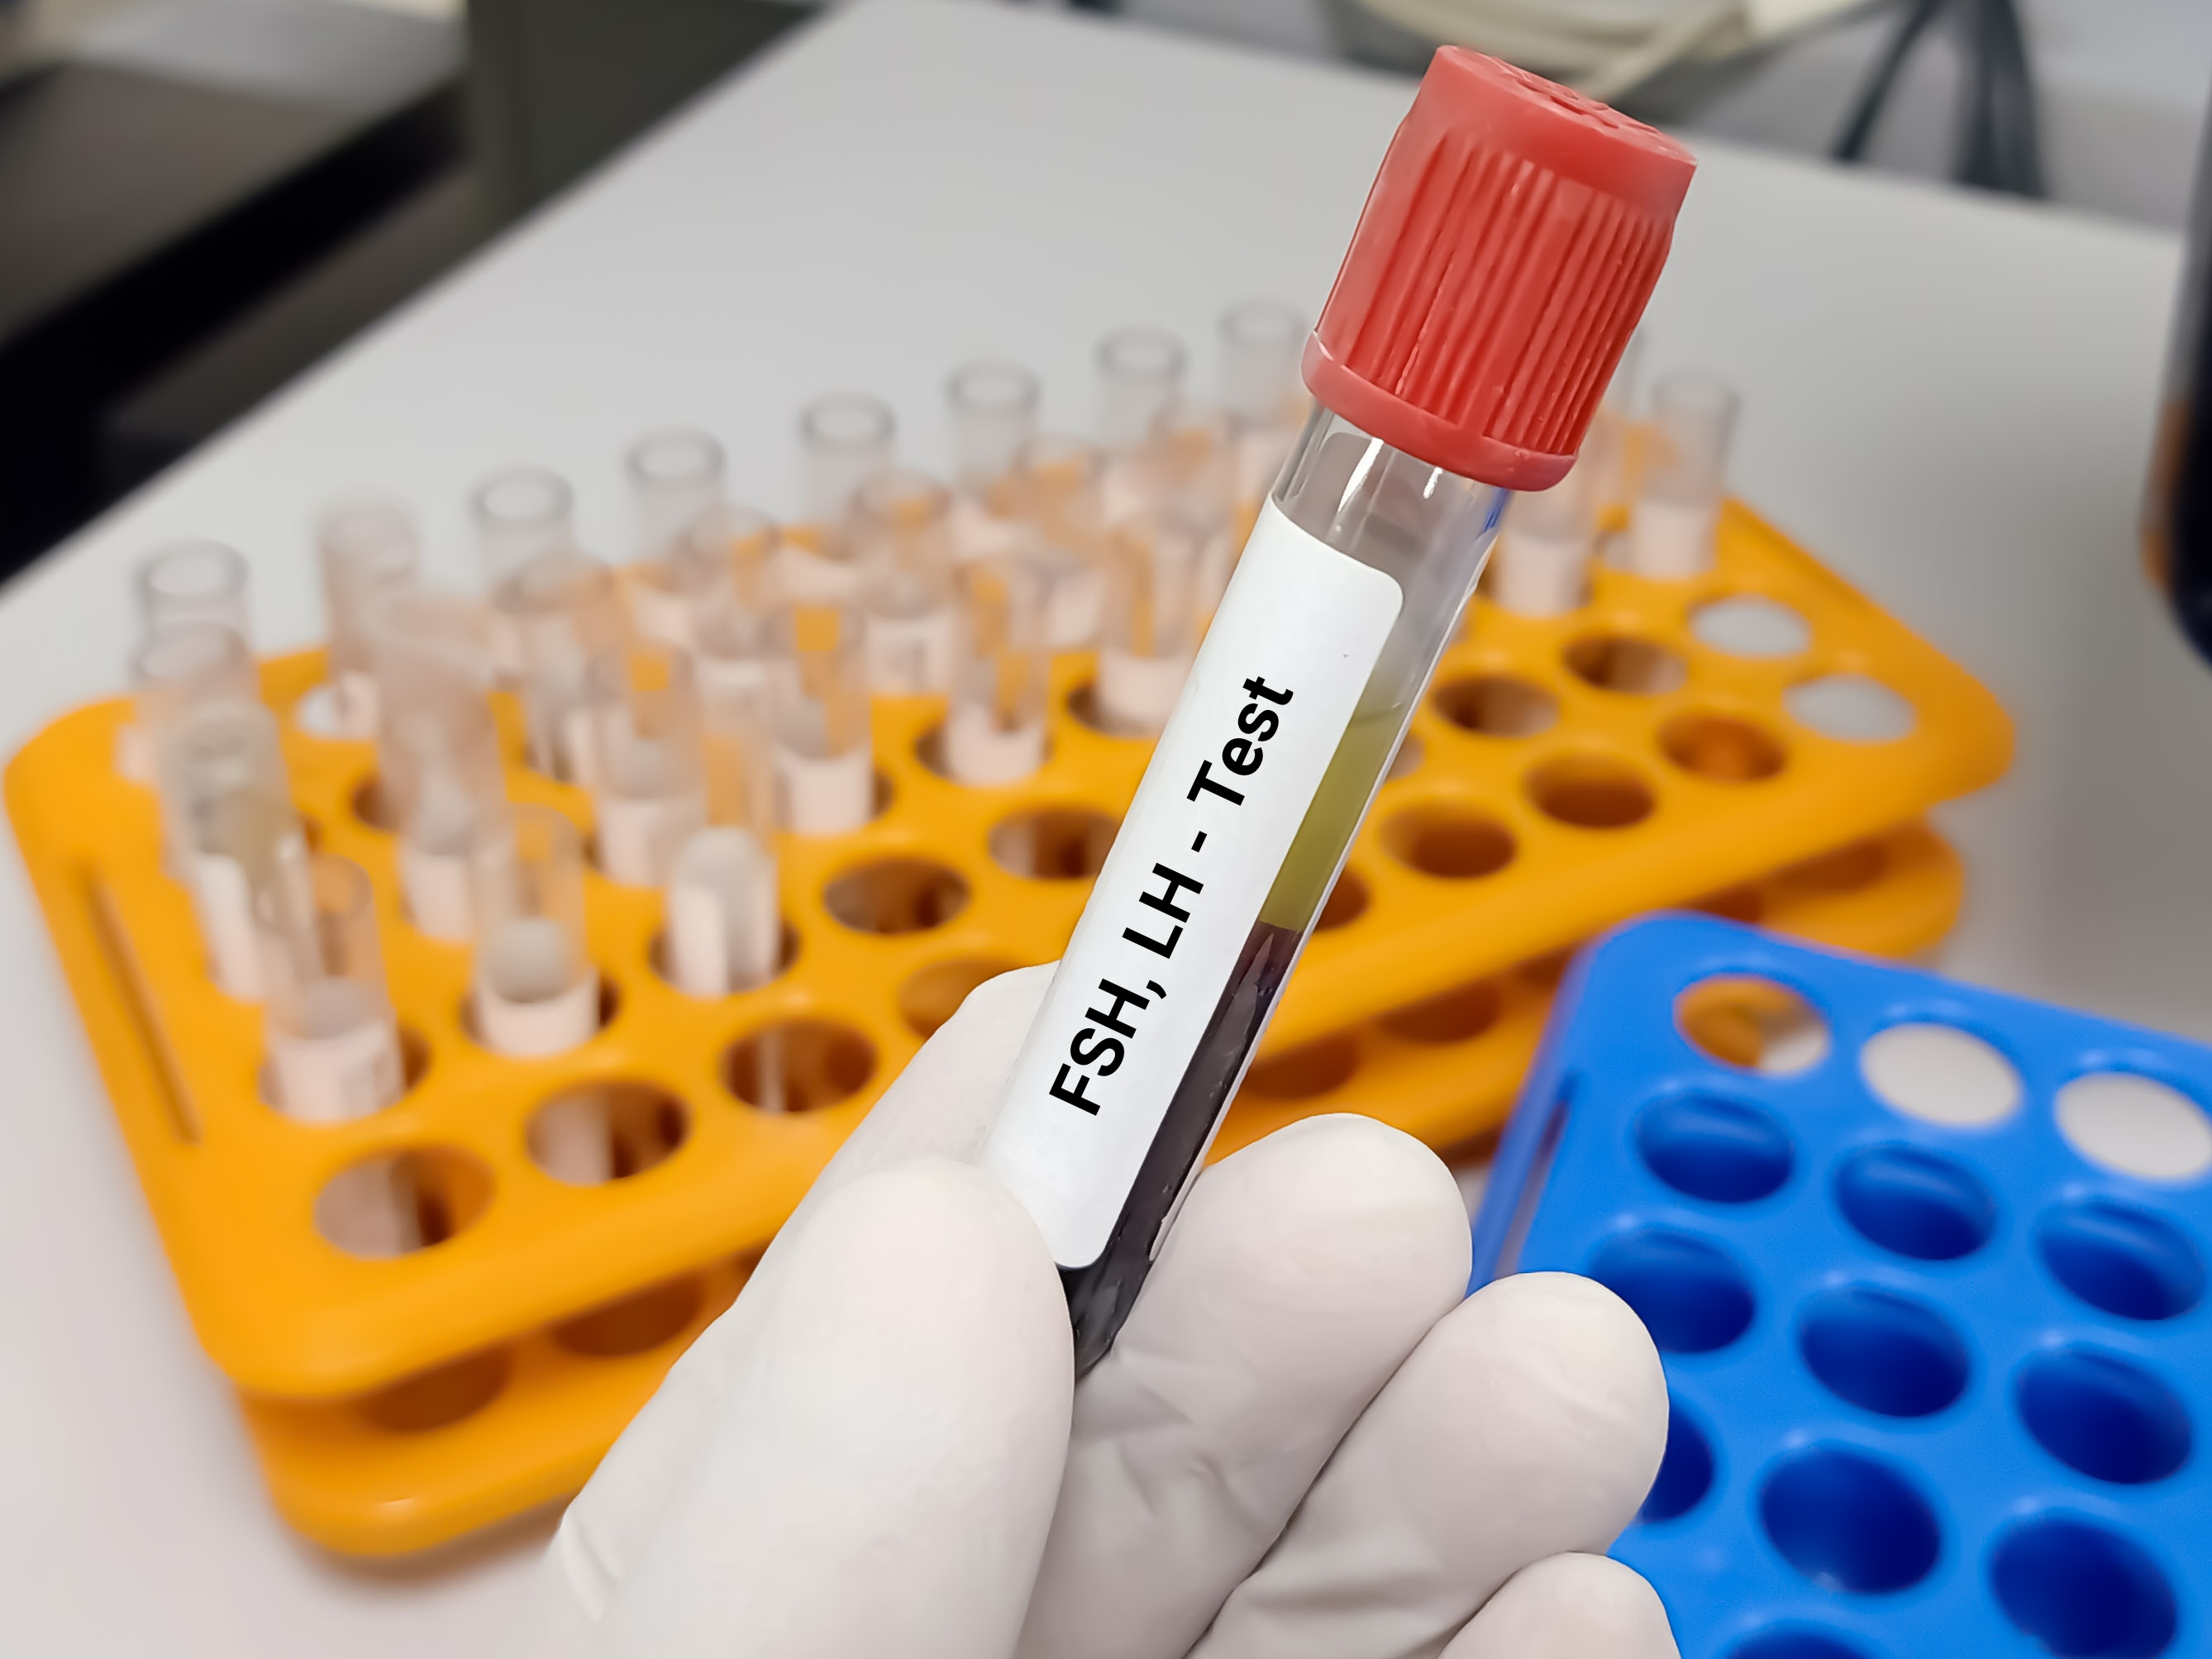 The FSH test is conducted on blood samples.